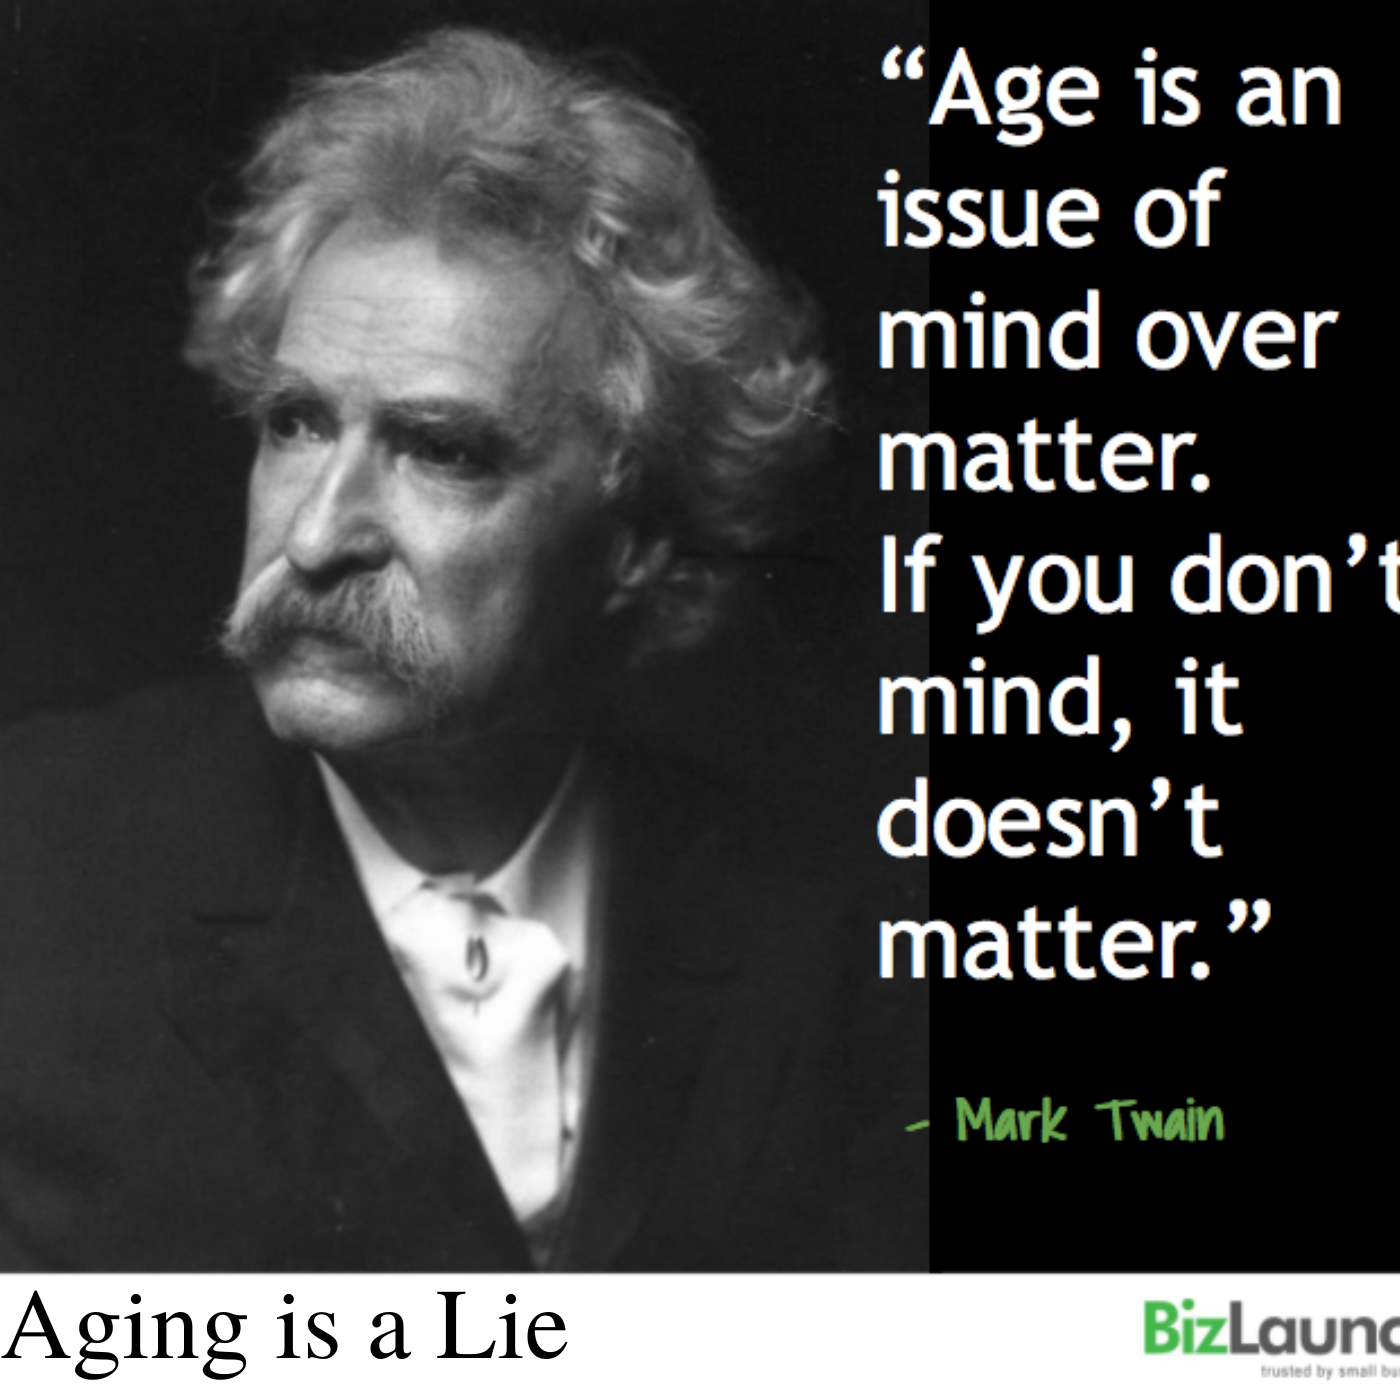 * Aging is a Lie